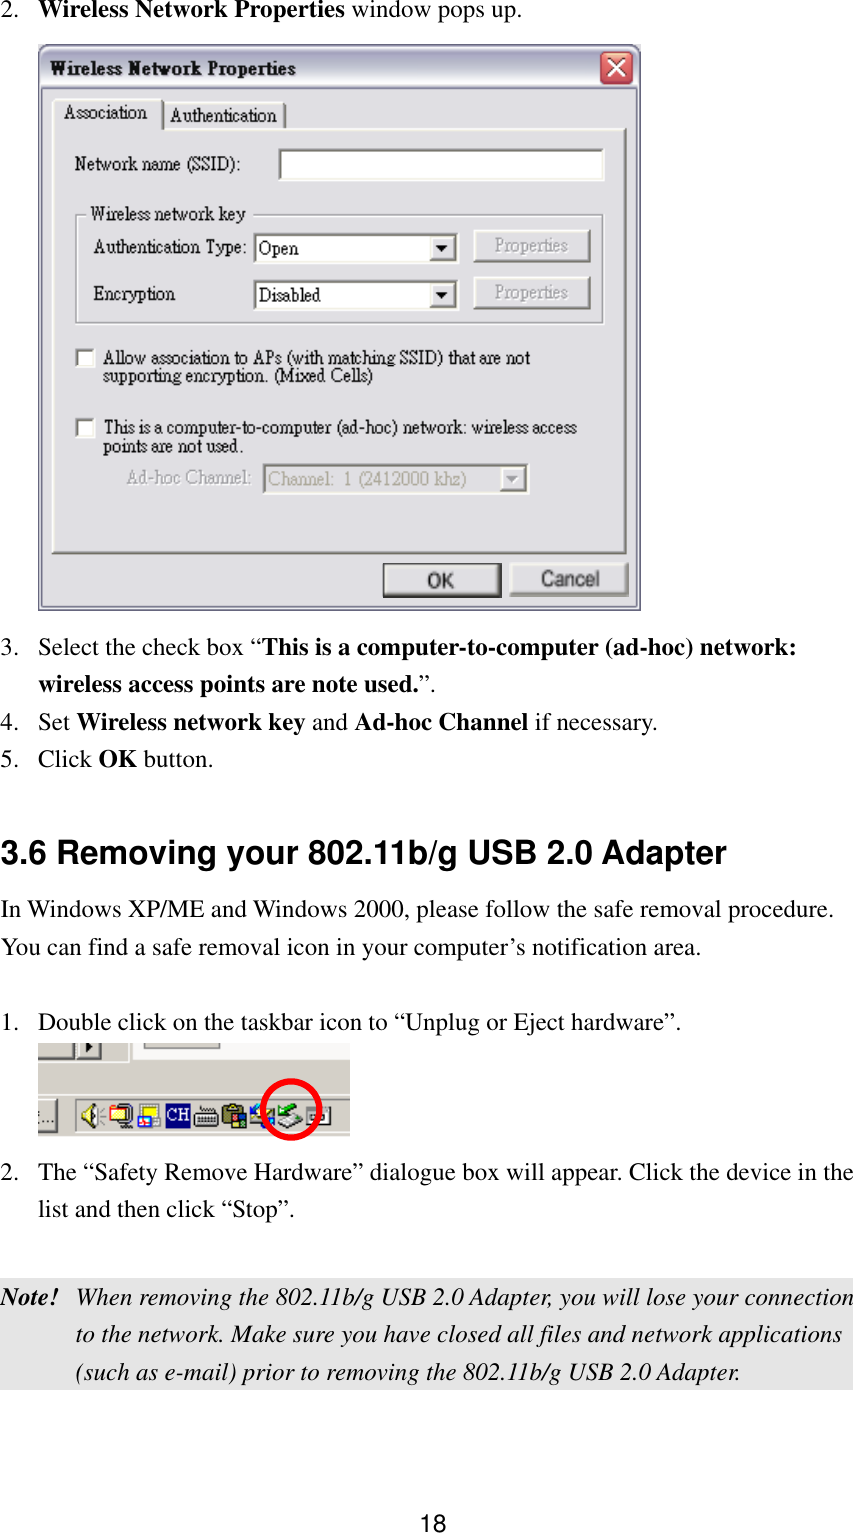  182.  Wireless Network Properties window pops up.   3.  Select the check box “This is a computer-to-computer (ad-hoc) network: wireless access points are note used.”. 4. Set Wireless network key and Ad-hoc Channel if necessary. 5. Click OK button.  3.6 Removing your 802.11b/g USB 2.0 Adapter   In Windows XP/ME and Windows 2000, please follow the safe removal procedure. You can find a safe removal icon in your computer’s notification area.    1.  Double click on the taskbar icon to “Unplug or Eject hardware”.  2.  The “Safety Remove Hardware” dialogue box will appear. Click the device in the list and then click “Stop”.  Note!  When removing the 802.11b/g USB 2.0 Adapter, you will lose your connection to the network. Make sure you have closed all files and network applications (such as e-mail) prior to removing the 802.11b/g USB 2.0 Adapter.   